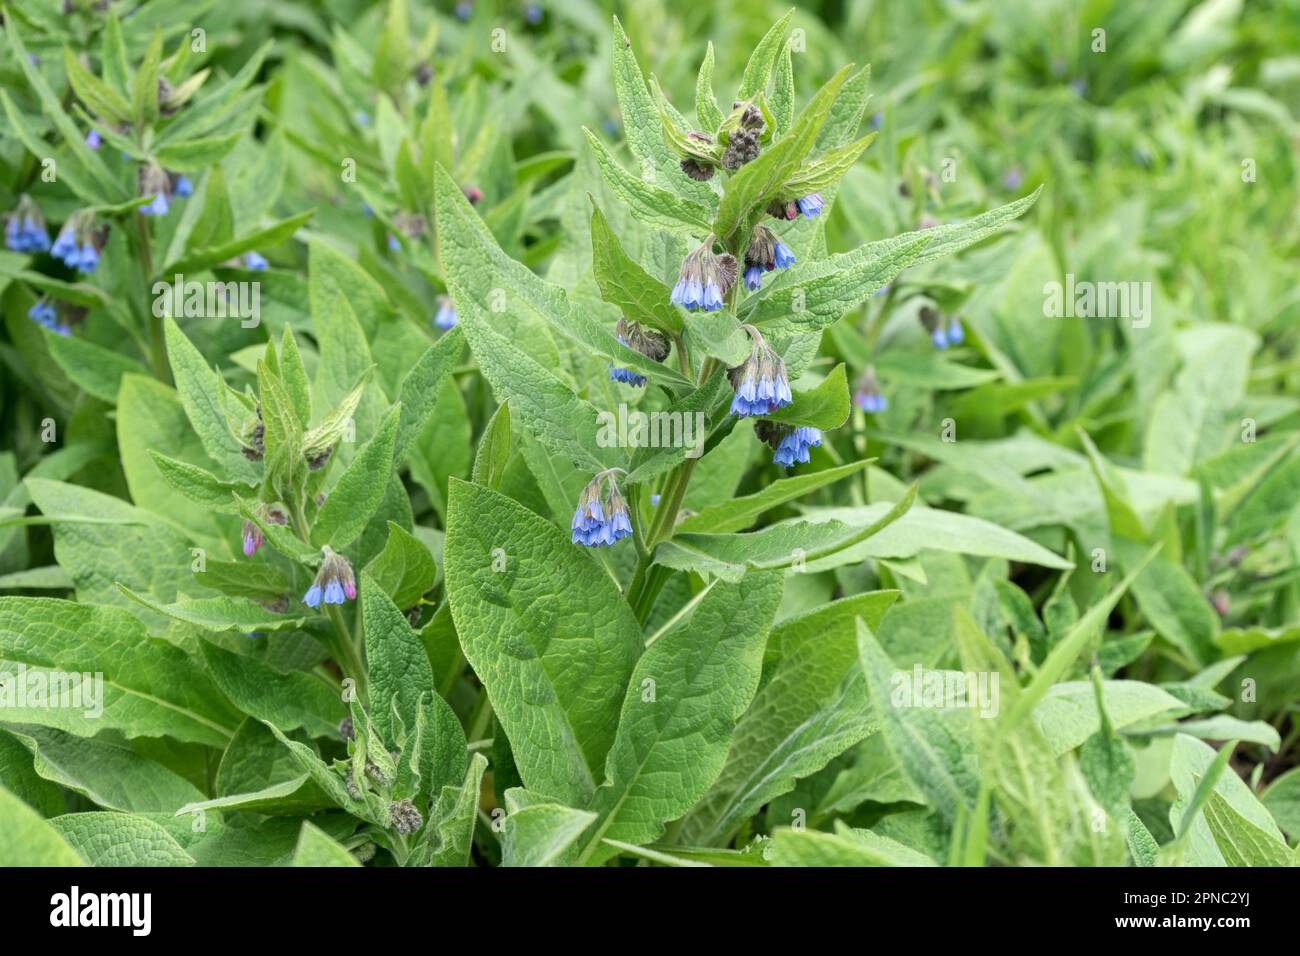 Close-up of a flowering comfrey plant Stock Photo